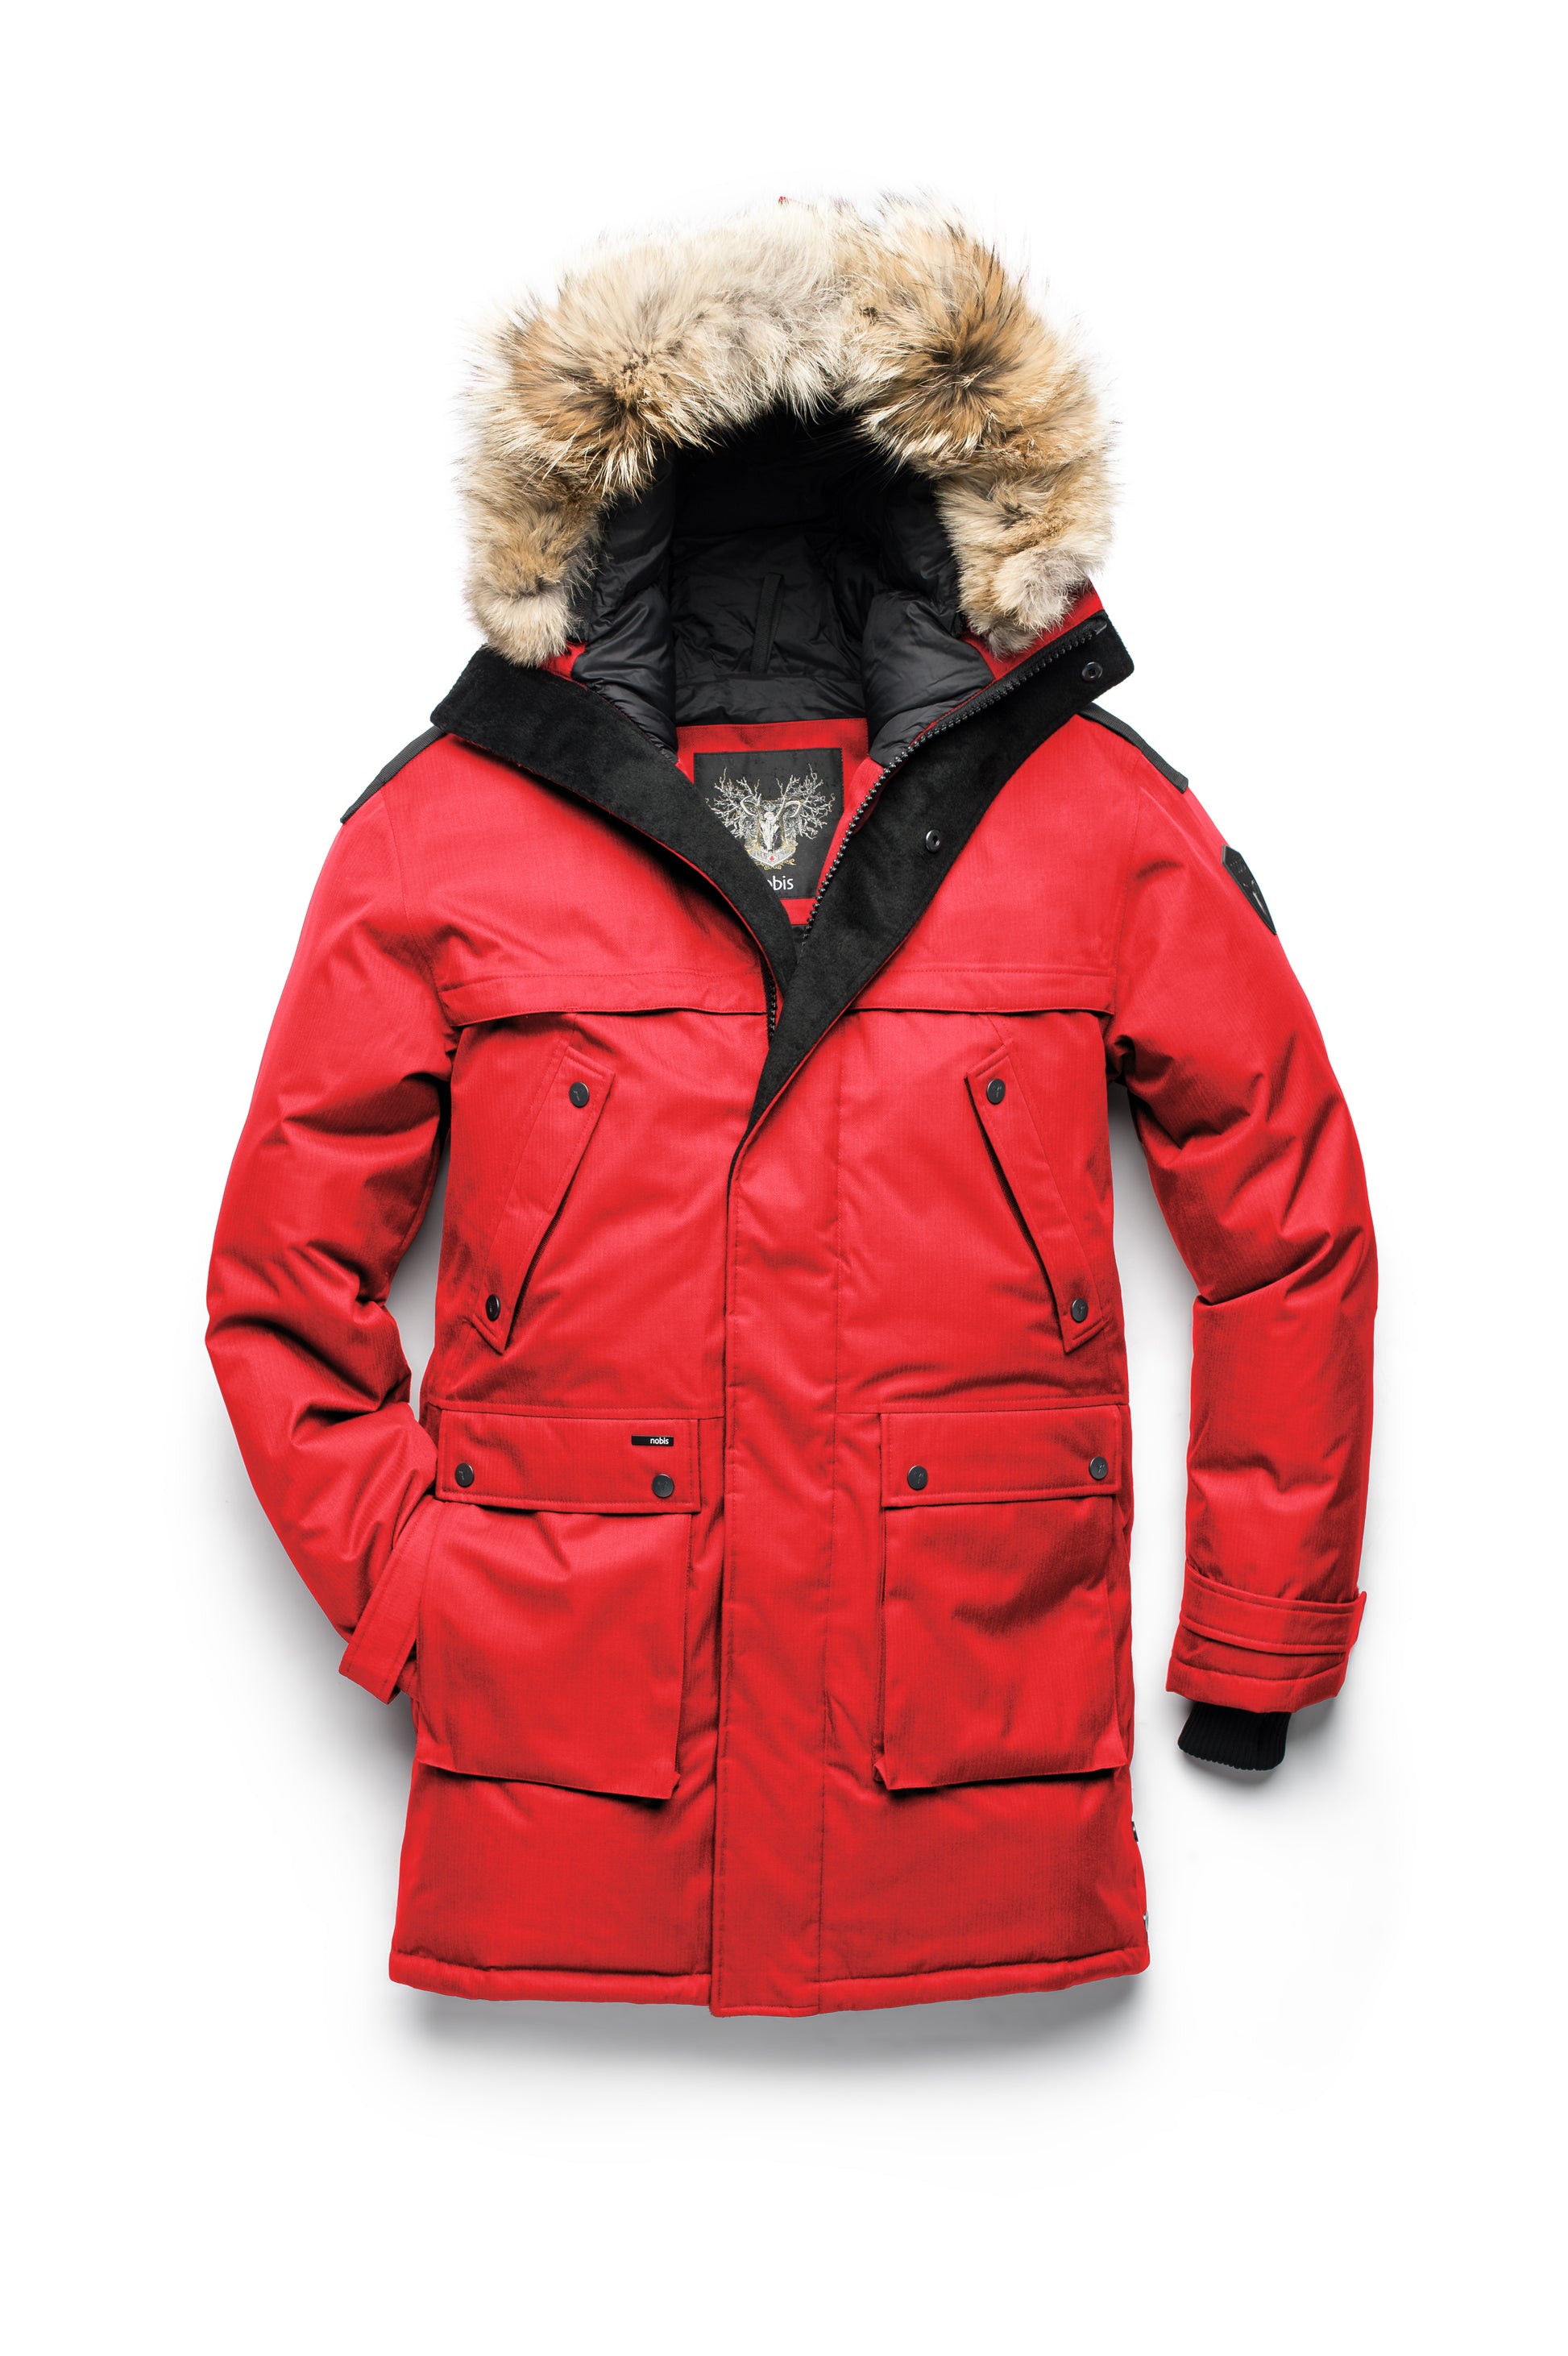 Men's Best Selling Parka the Yatesy is a down filled jacket with a zipper closure and magnetic placket in CH Red